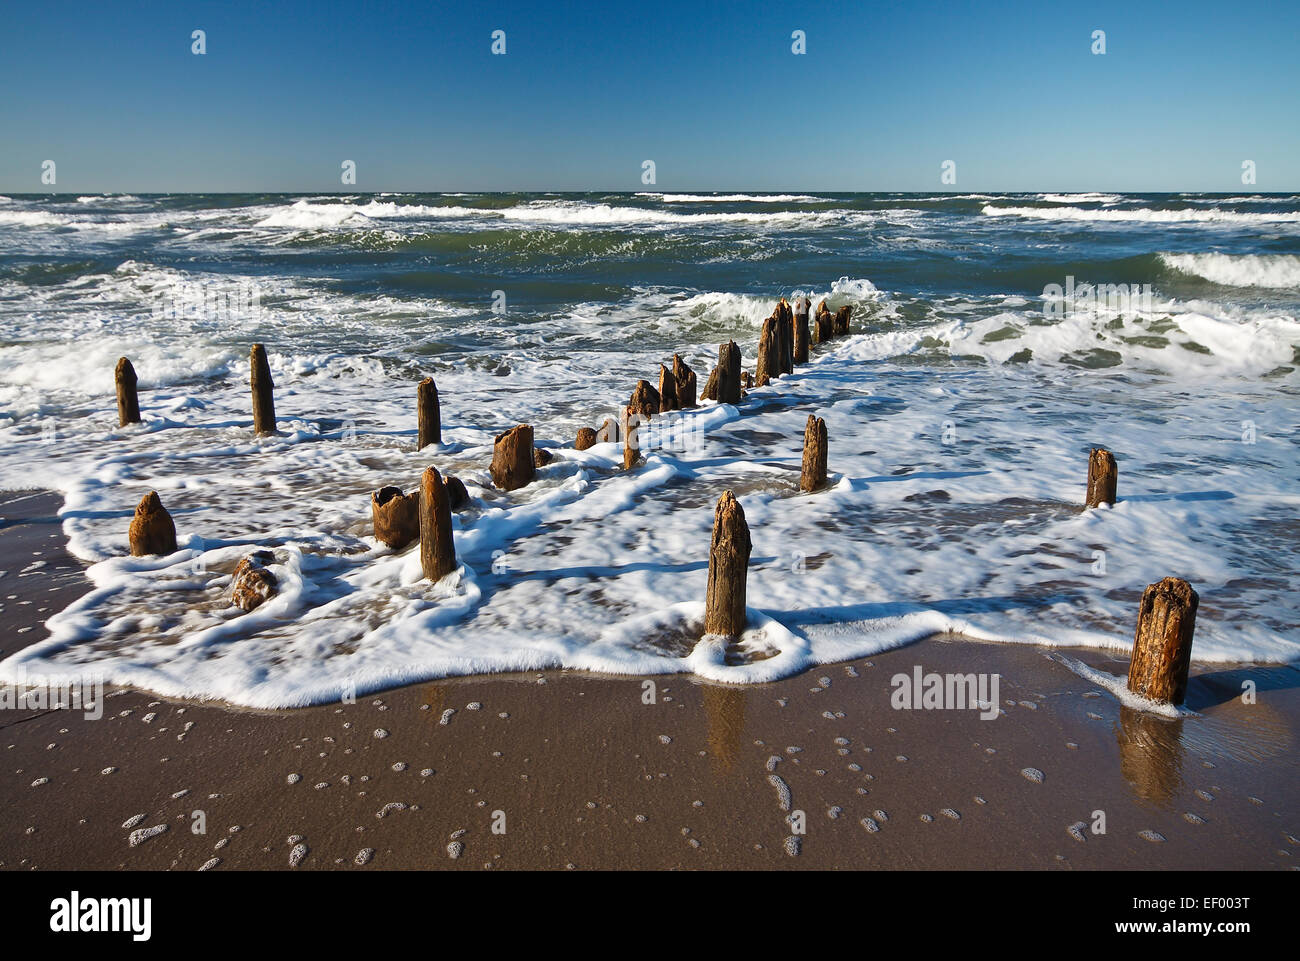 On a sunny day on the Baltic coast. Stock Photo